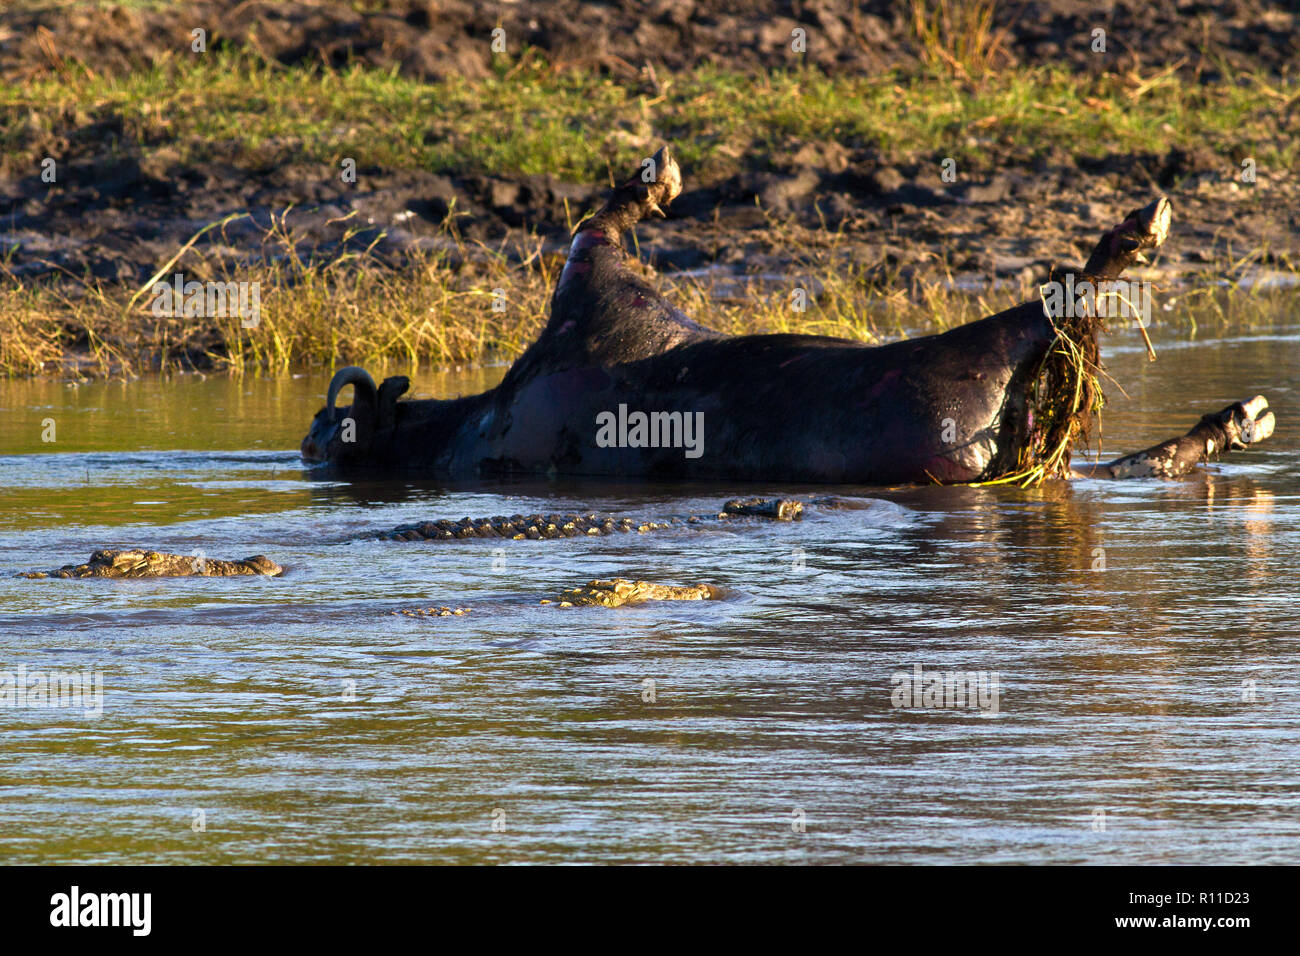 Large crocodiles gather around the bloating carcass of a buffalo bull that was drowned several days earlier and has now softened enough for them to te Stock Photo